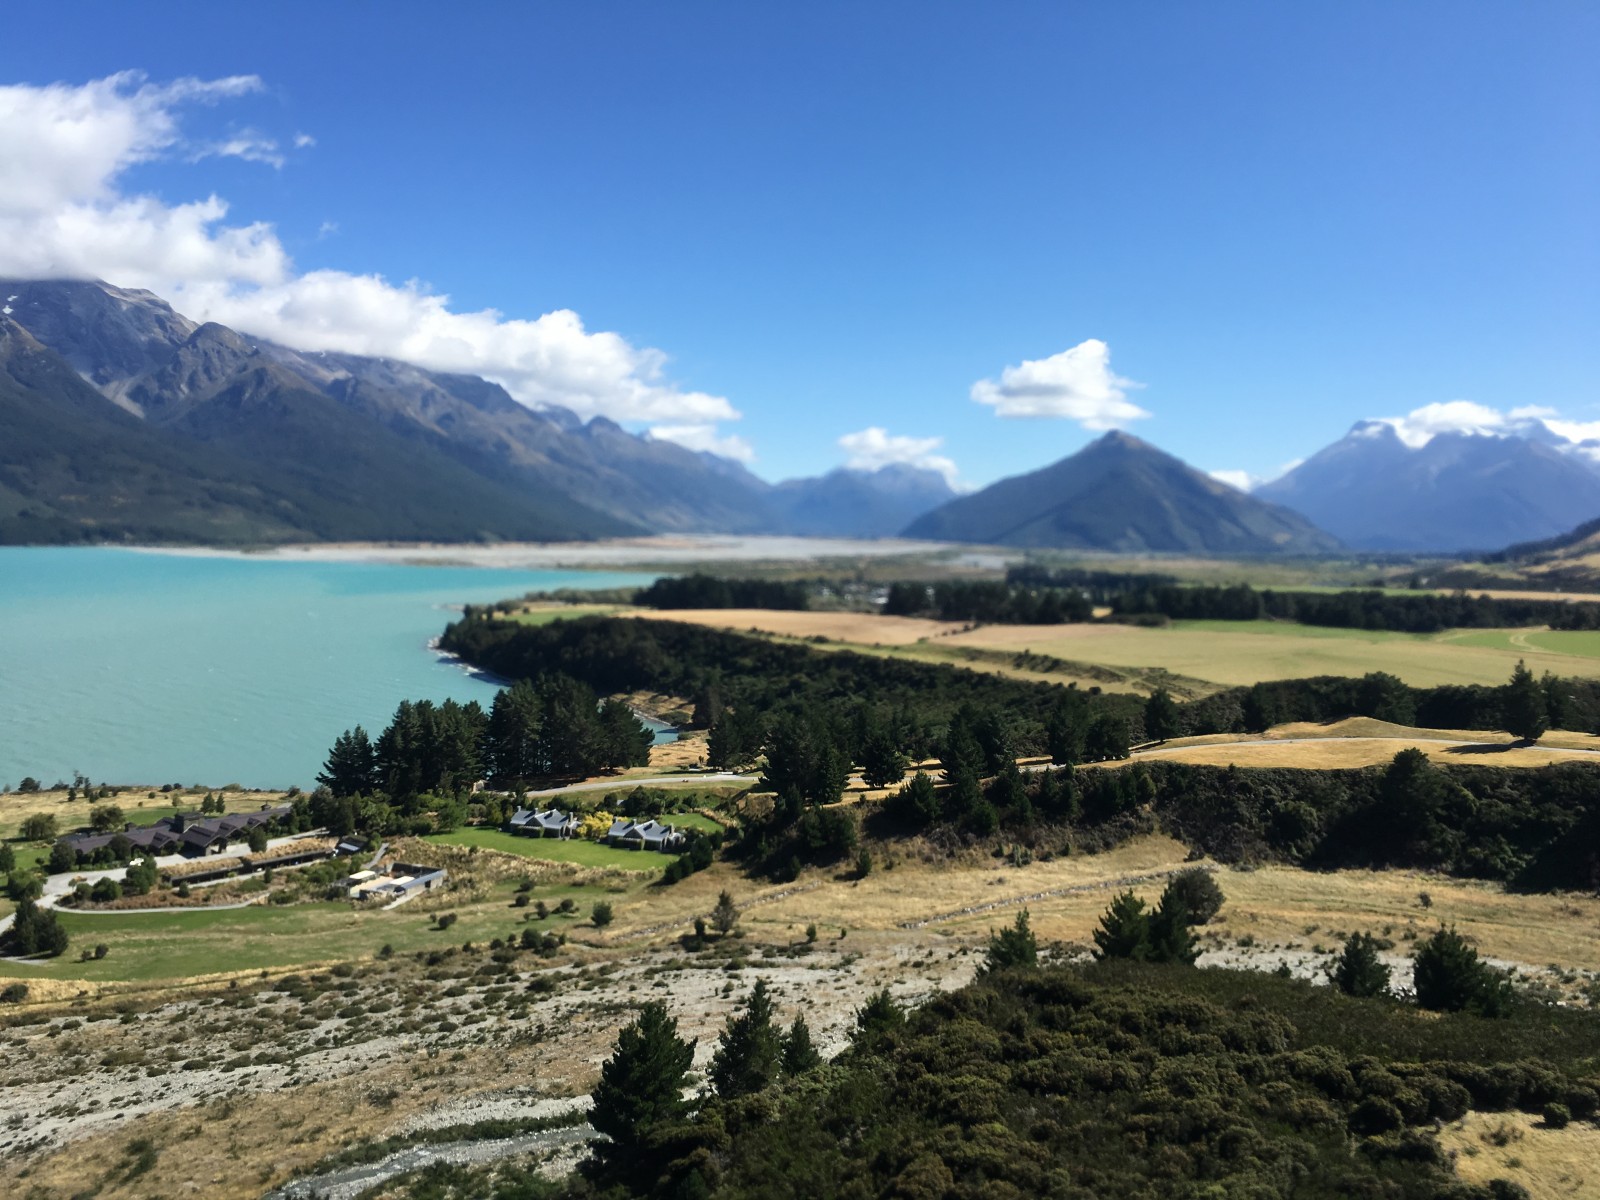 The view of Glenorchy from lift off